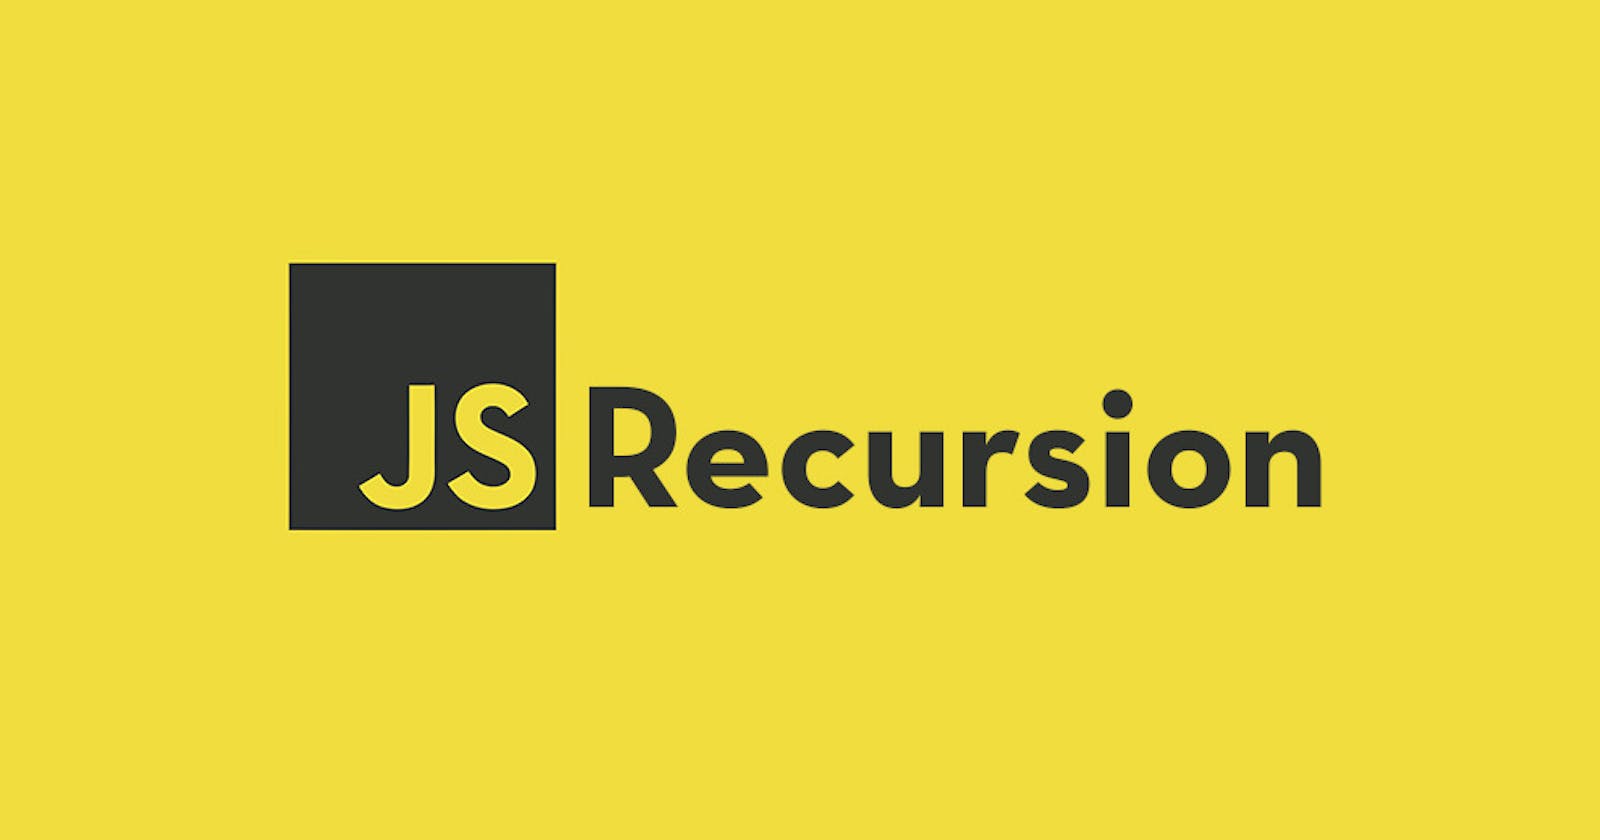 Recursion: What is it exactly?